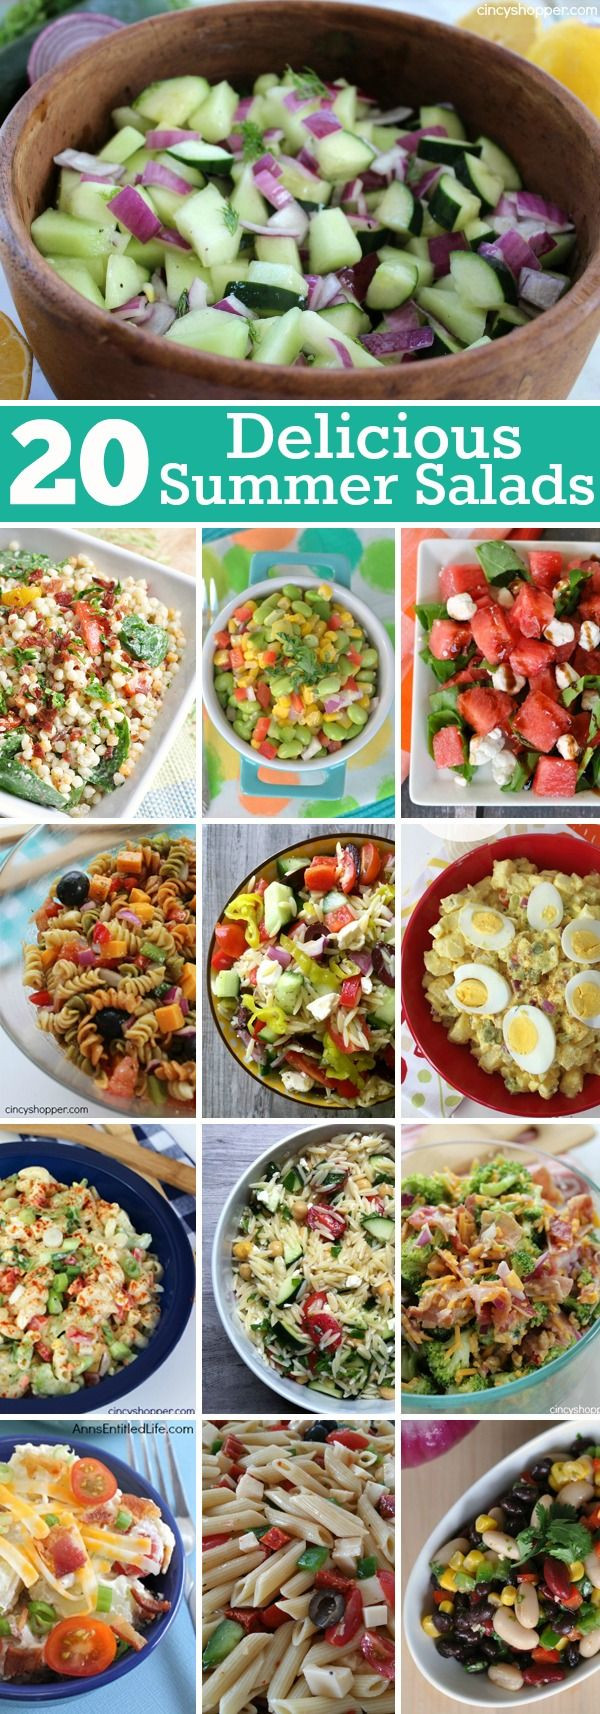 Easy Picnic Side Dishes
 The 25 best Summer picnic ideas on Pinterest